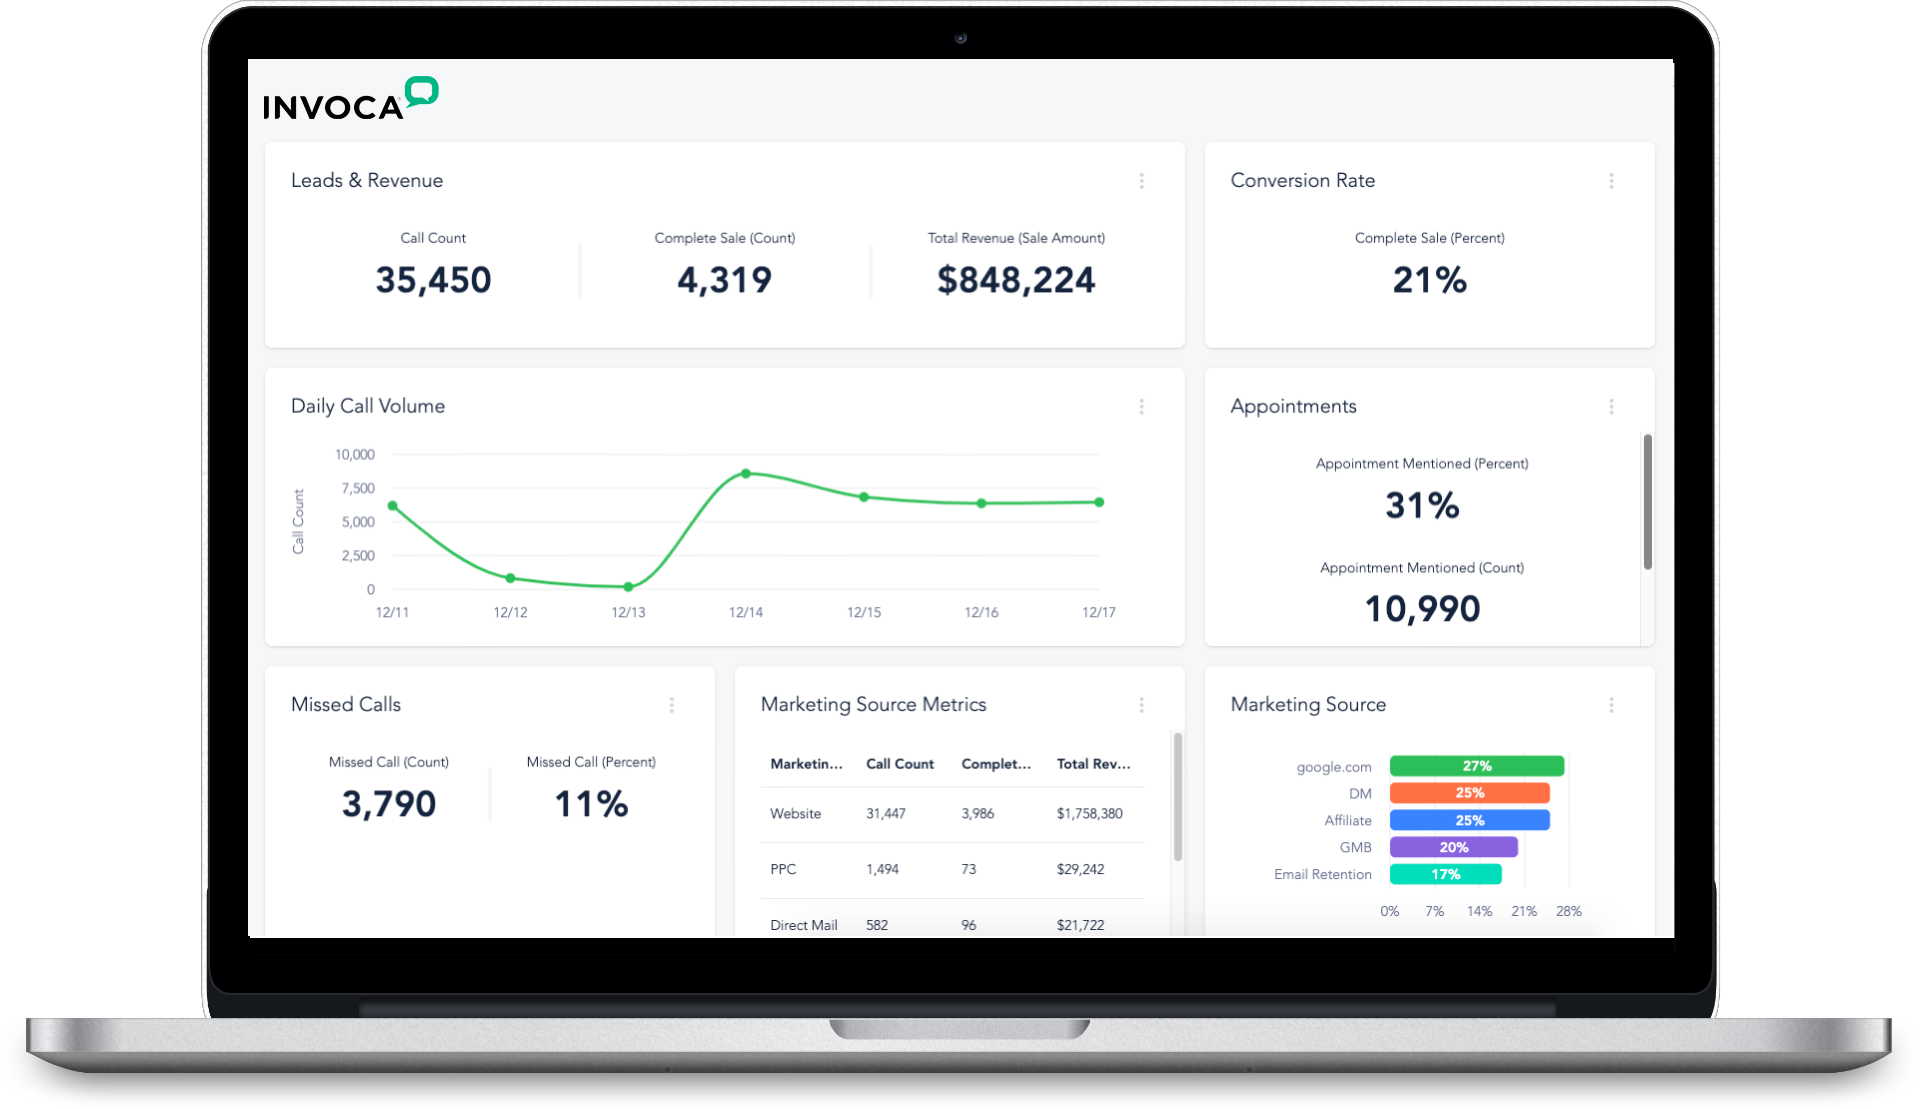 Monitor campaign performance, spot trends, and see up-to-the-minute analytics. Empower everyone on your team with call and conversion data filtered by source, calling page, location and more.